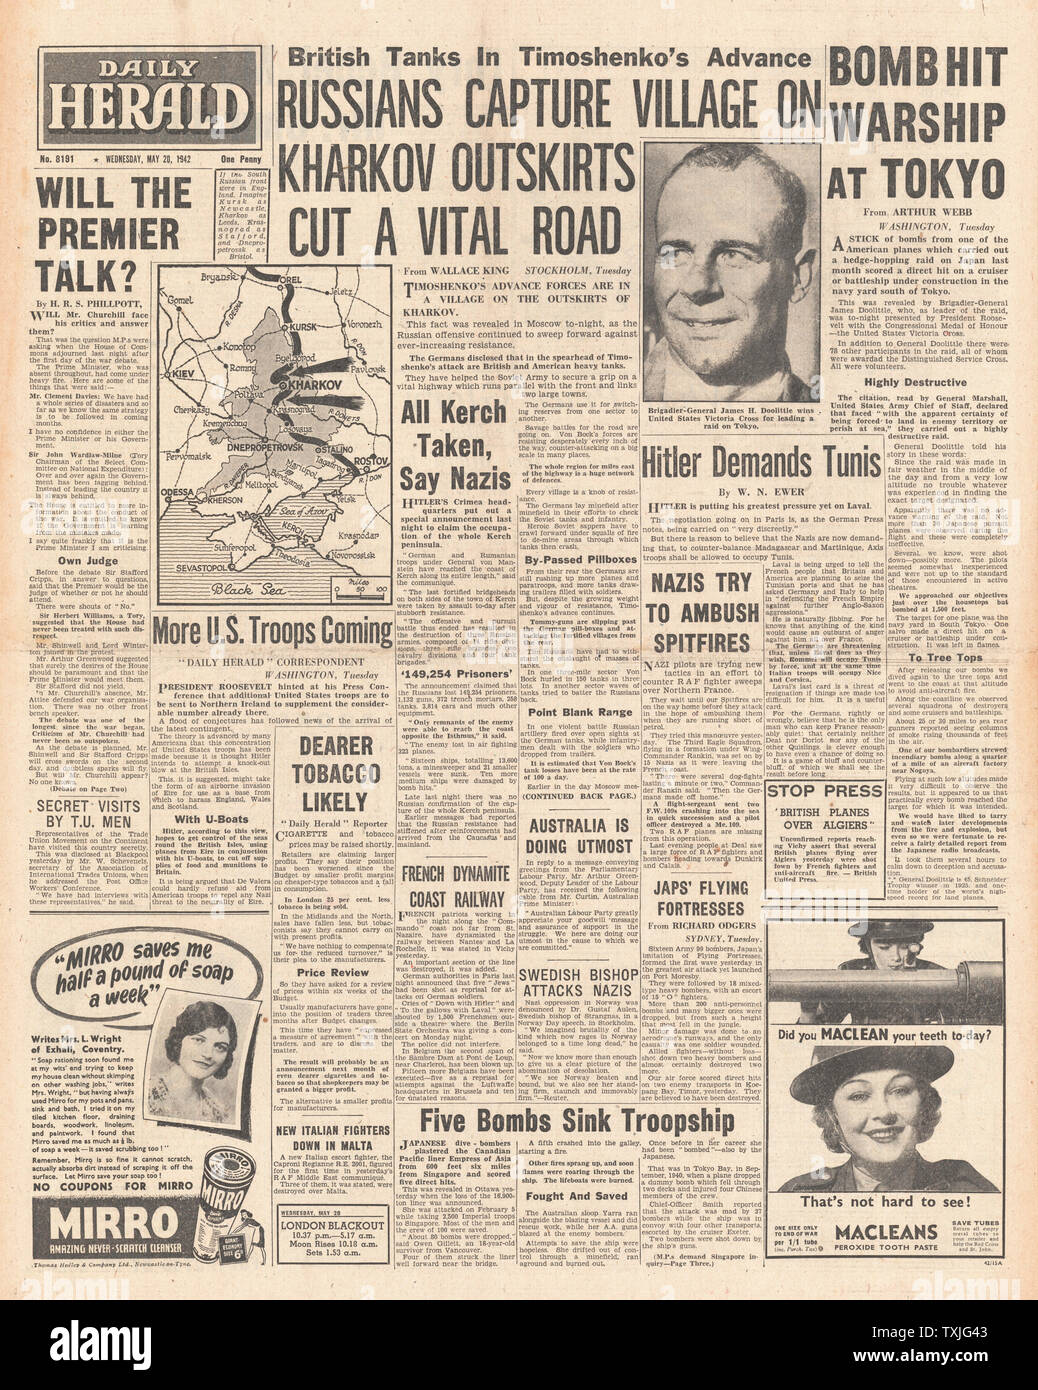 1942 front page Daily Herald Battle for Kharkov Stock Photo